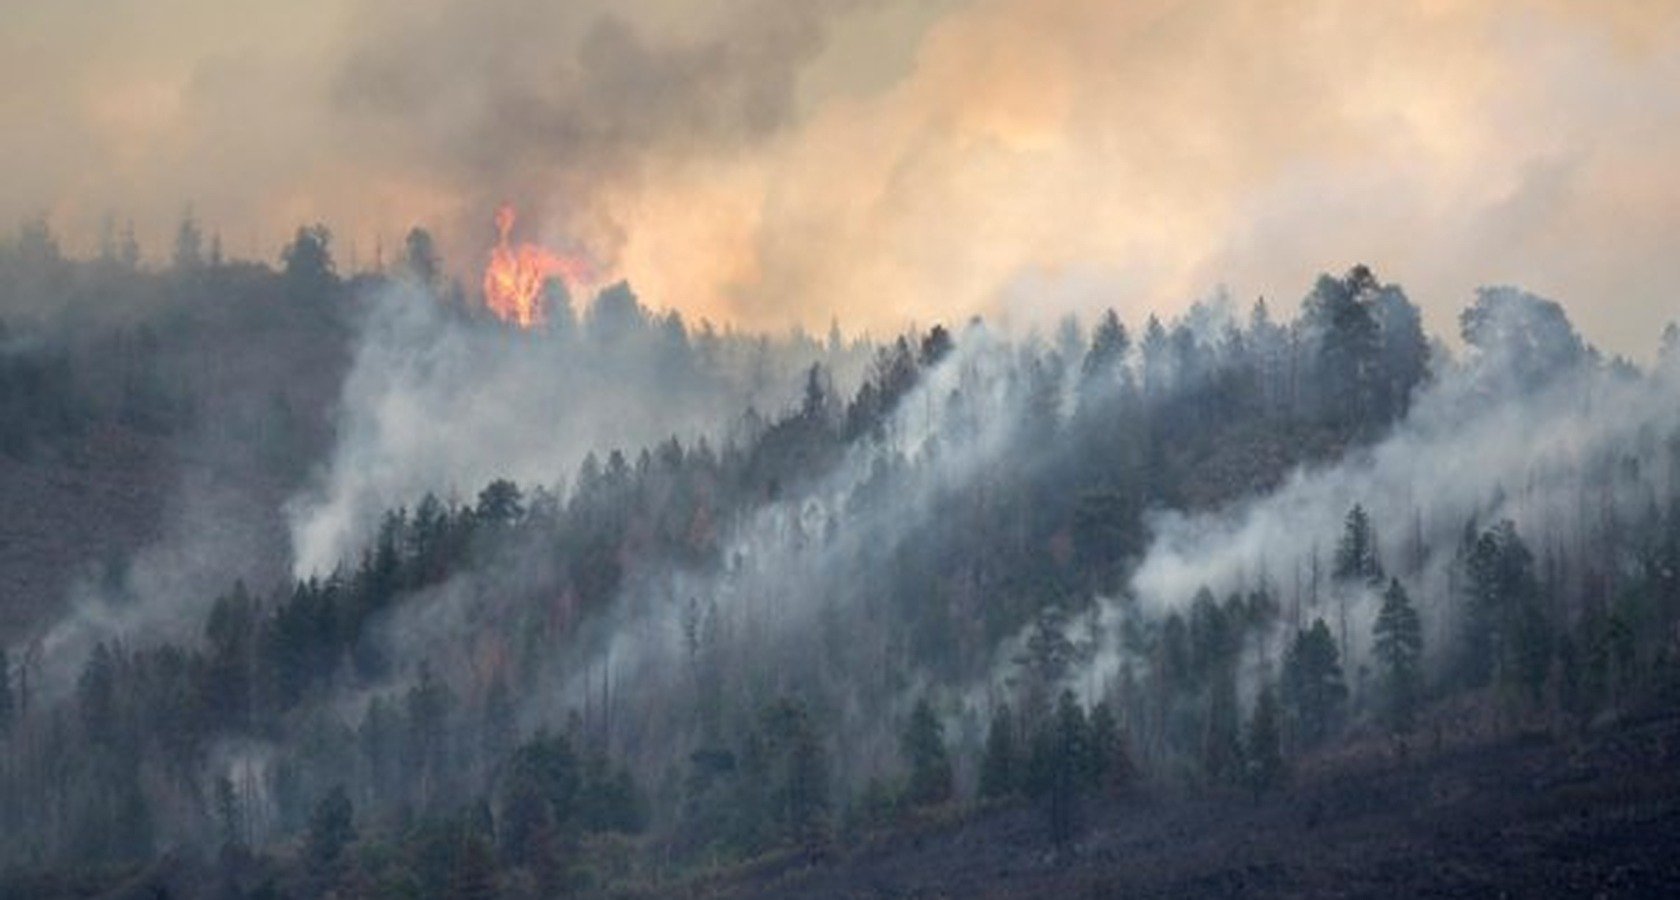 Harmful Health Effects of Air Pollutants from Wildfire Smoke Exposure